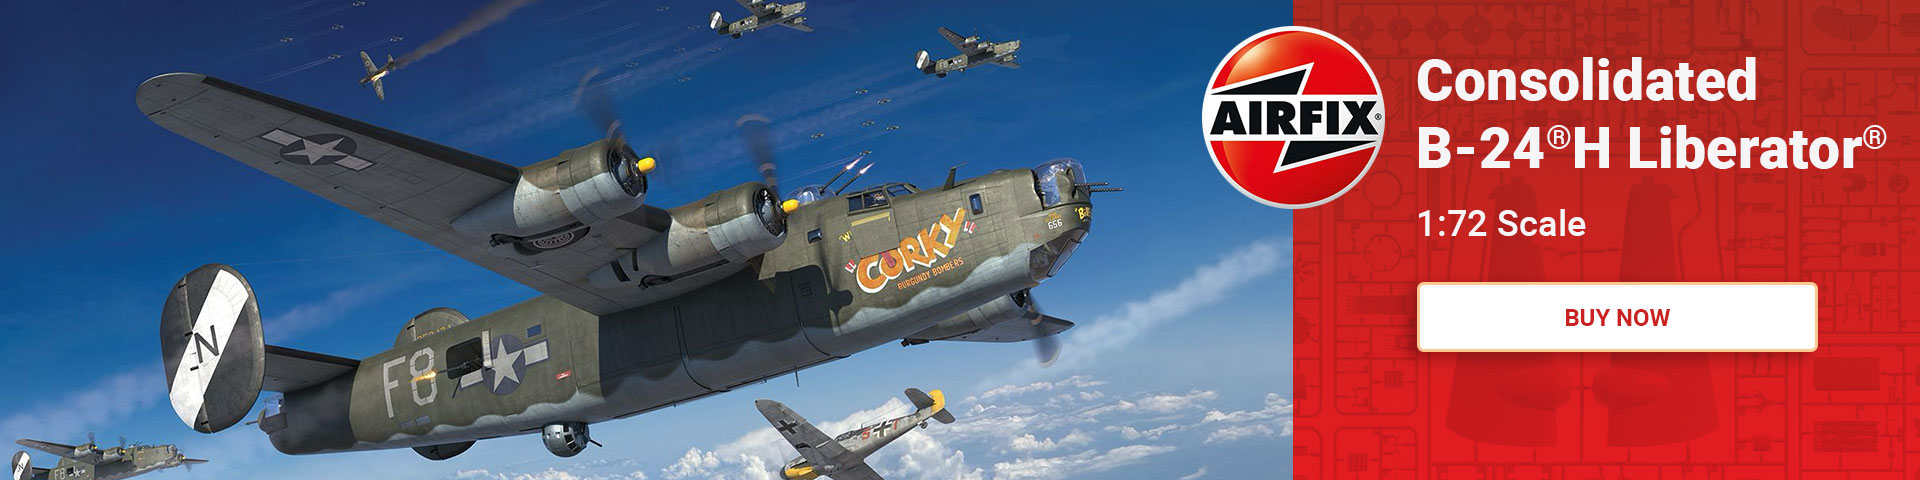 Purchase the Airfix 1/72 Consolidated B-24H Liberator model kit now